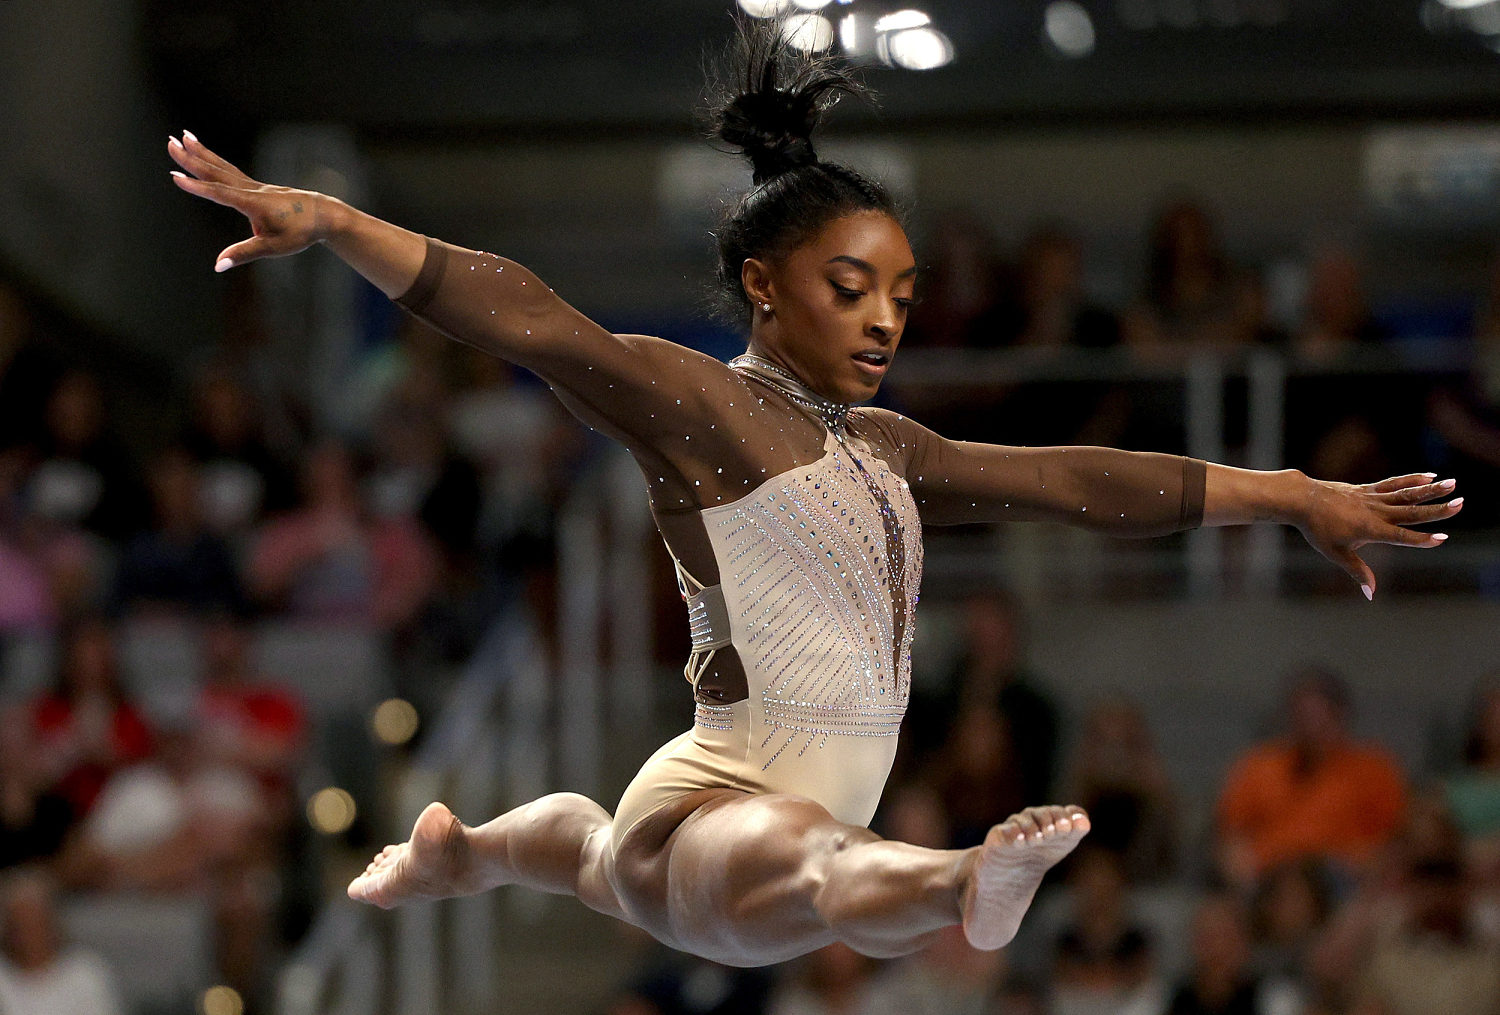 Simone Biles wins record ninth national championship and qualifies for Olympic trials